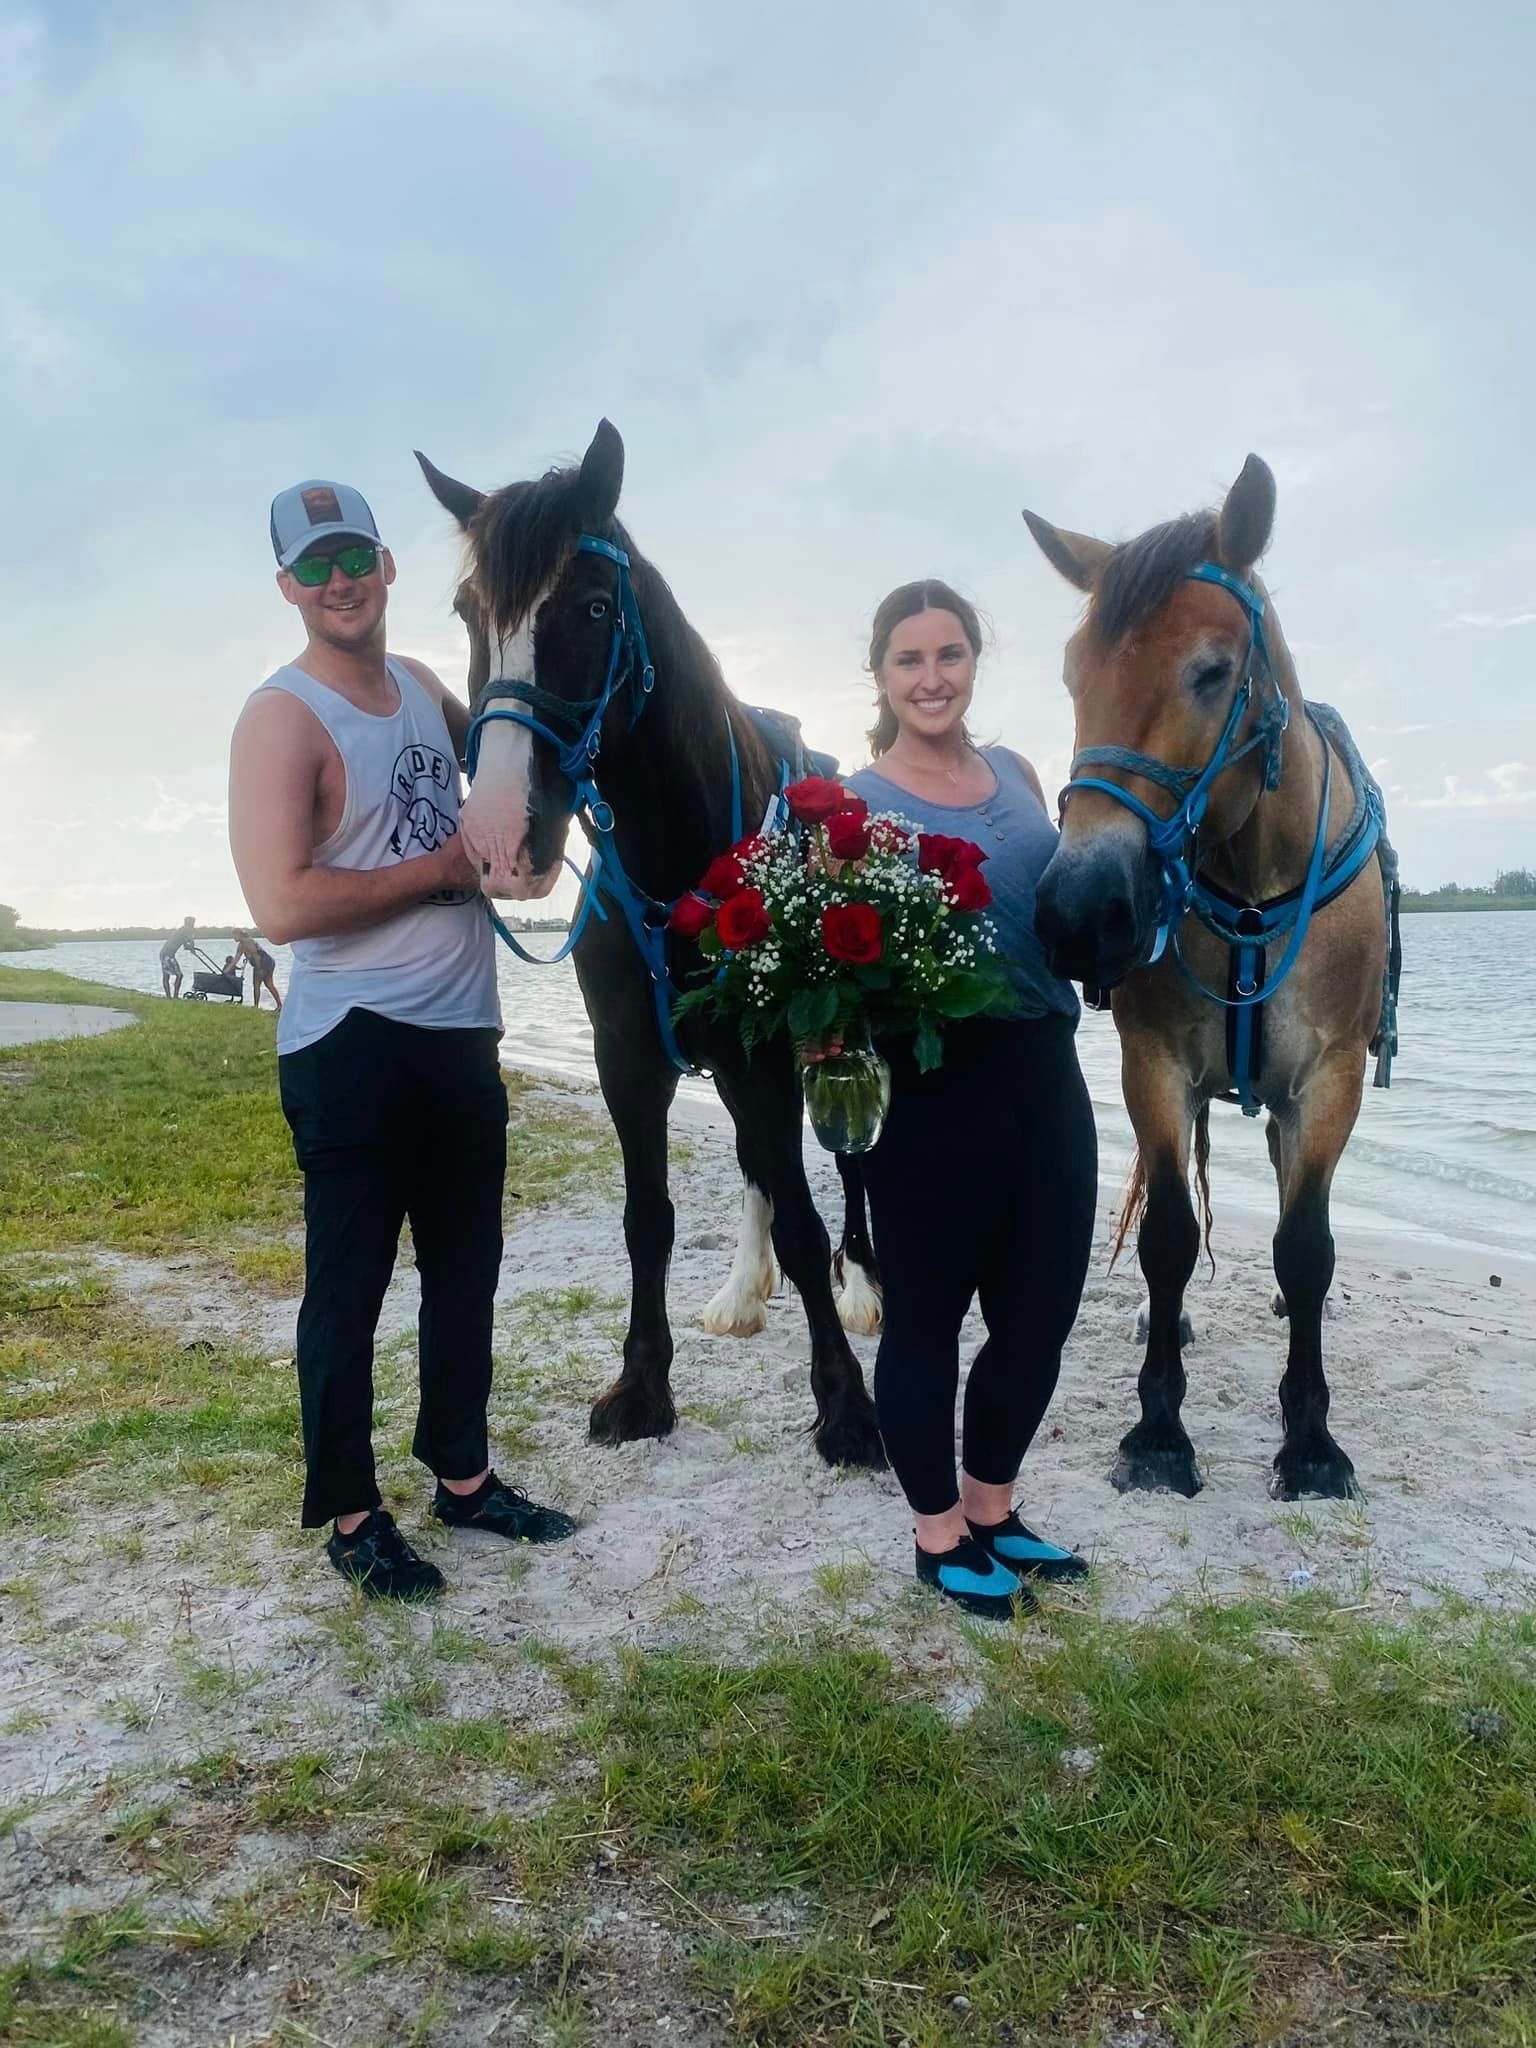 sweet couple with horses flowers